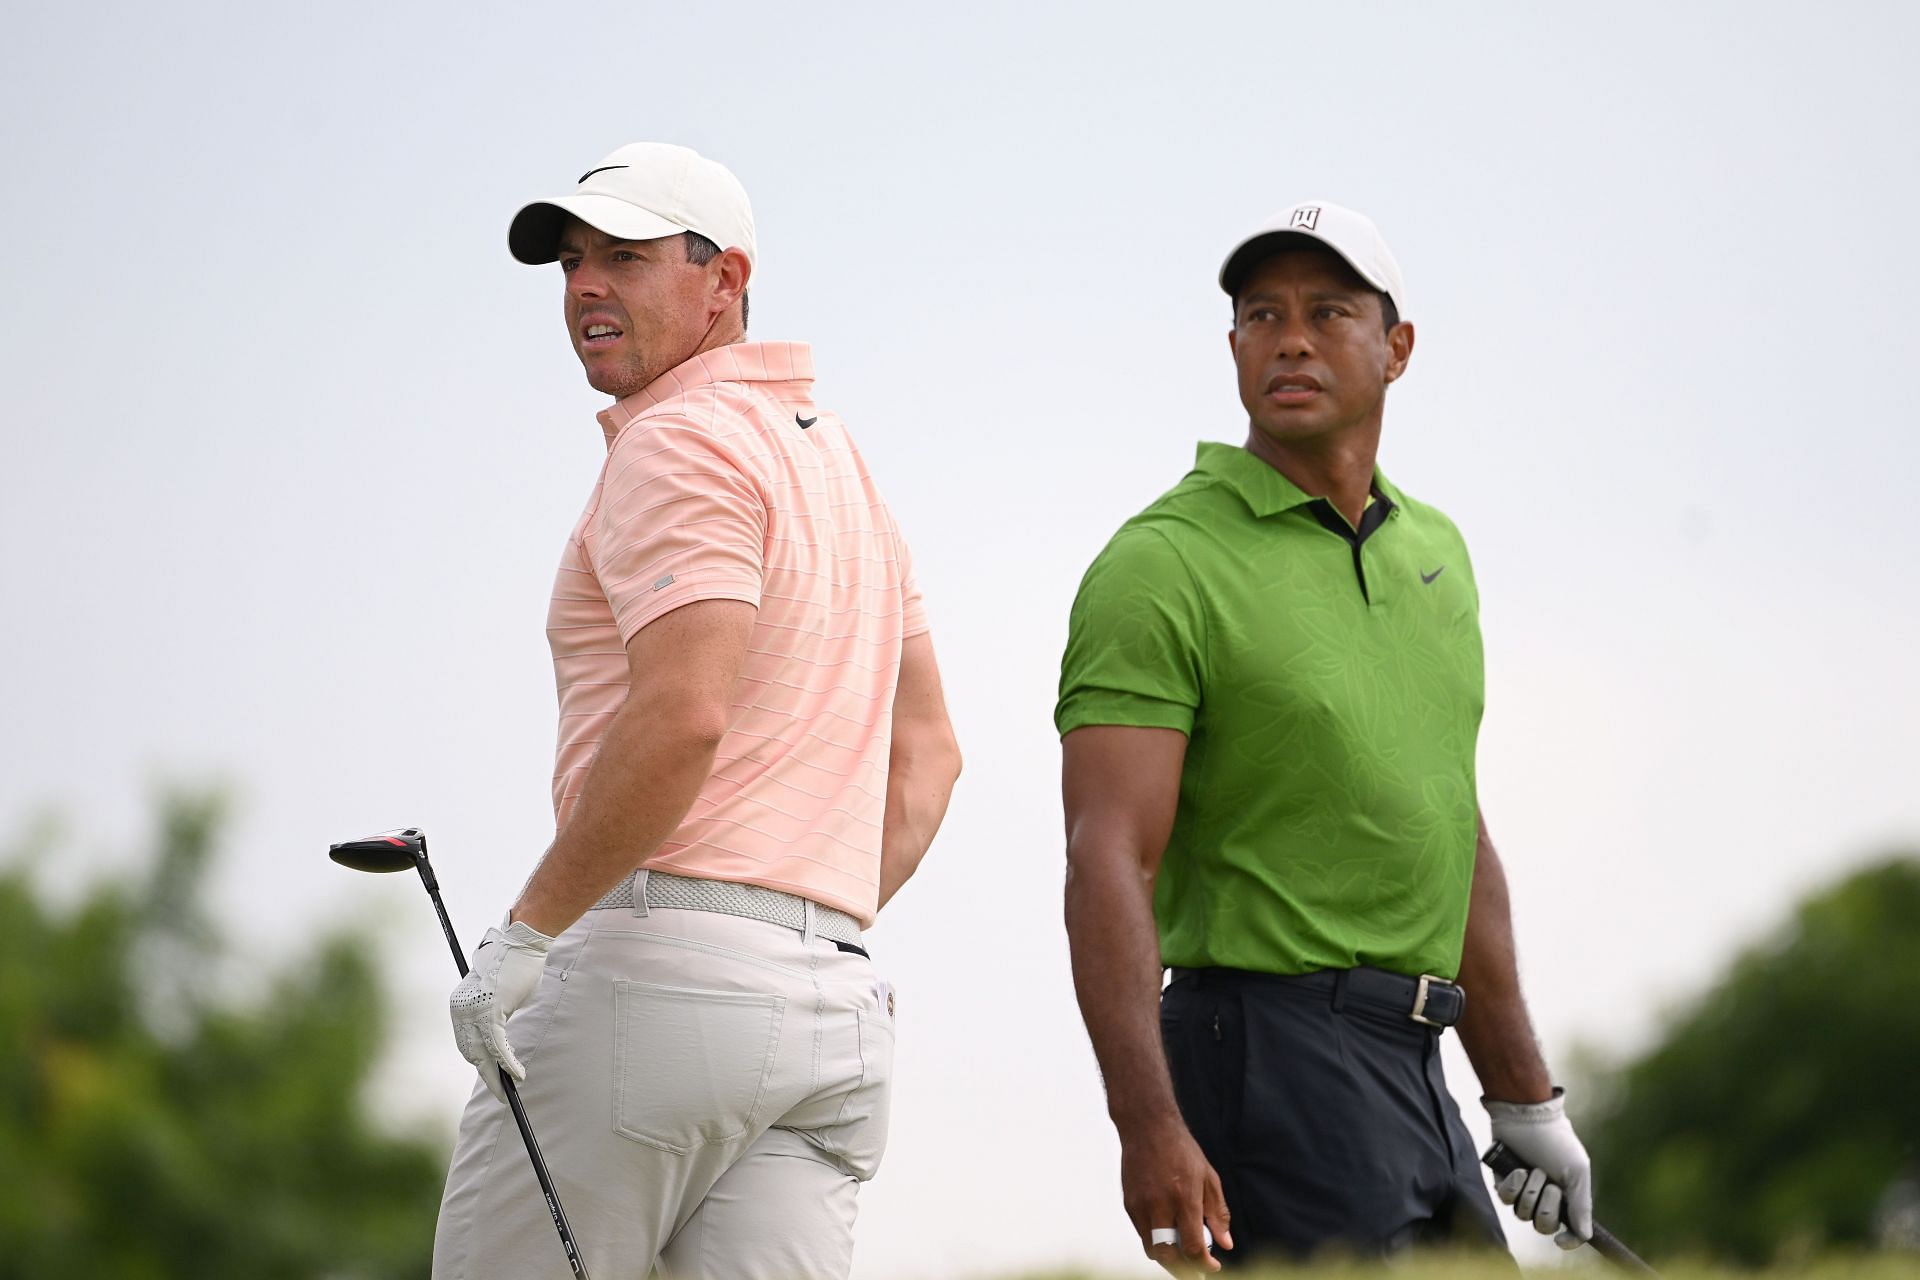 Woods and Mcllroy at the PGA Championship - Round 2